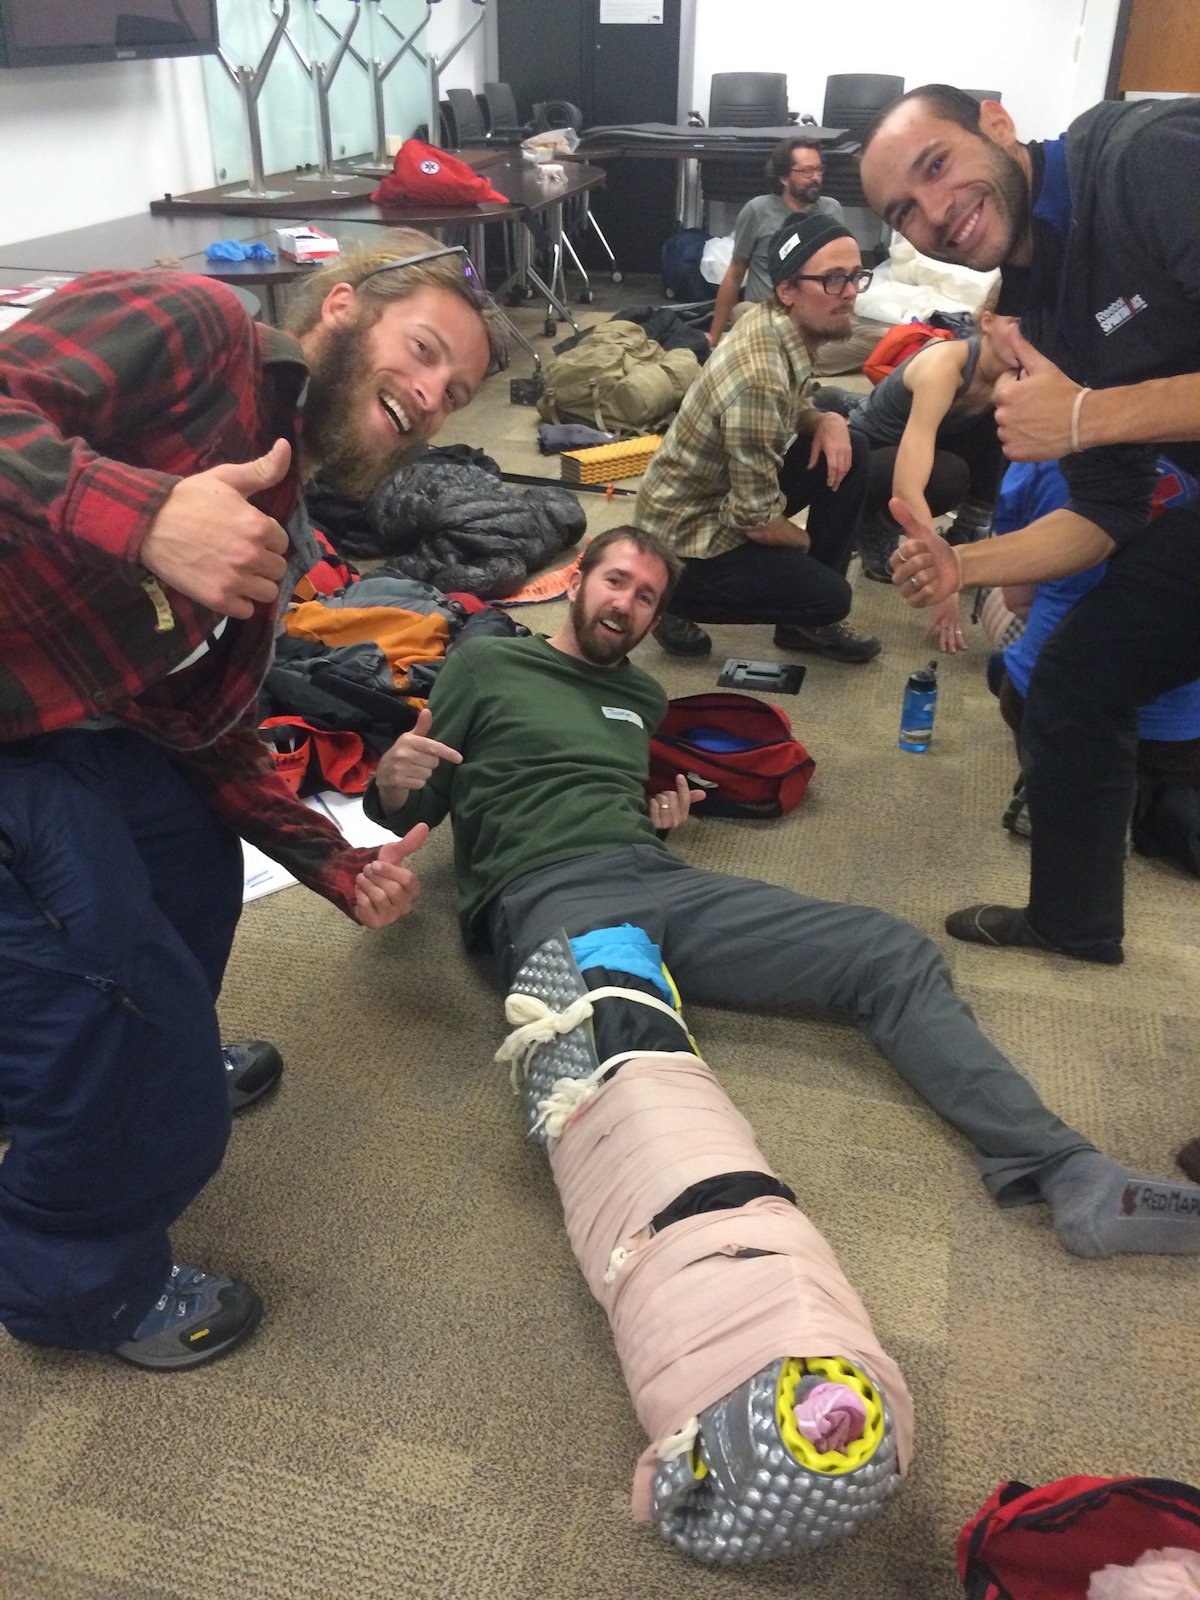 Our Wilderness First Responder class taught us to be resourceful with our gear!